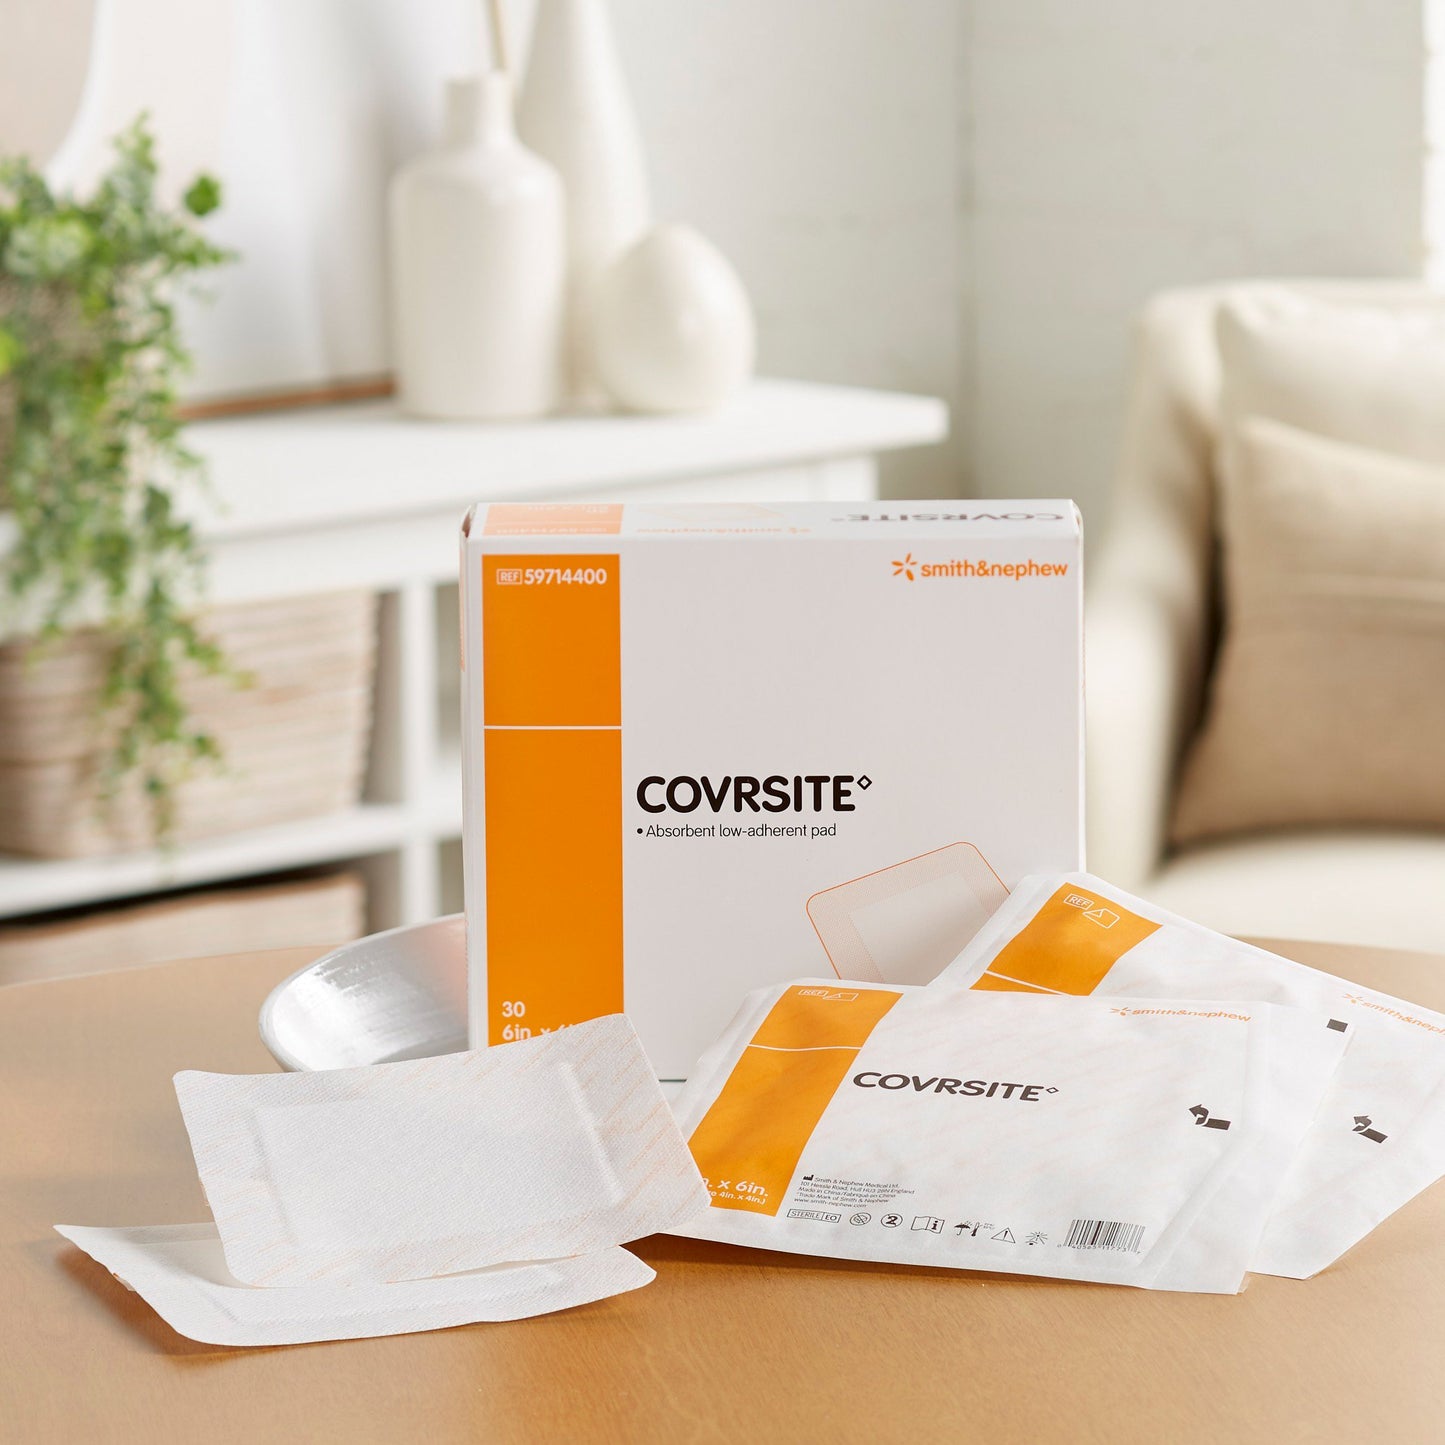 Covrsite Composite Dressing, 6 x 6 Inch, 30 ct